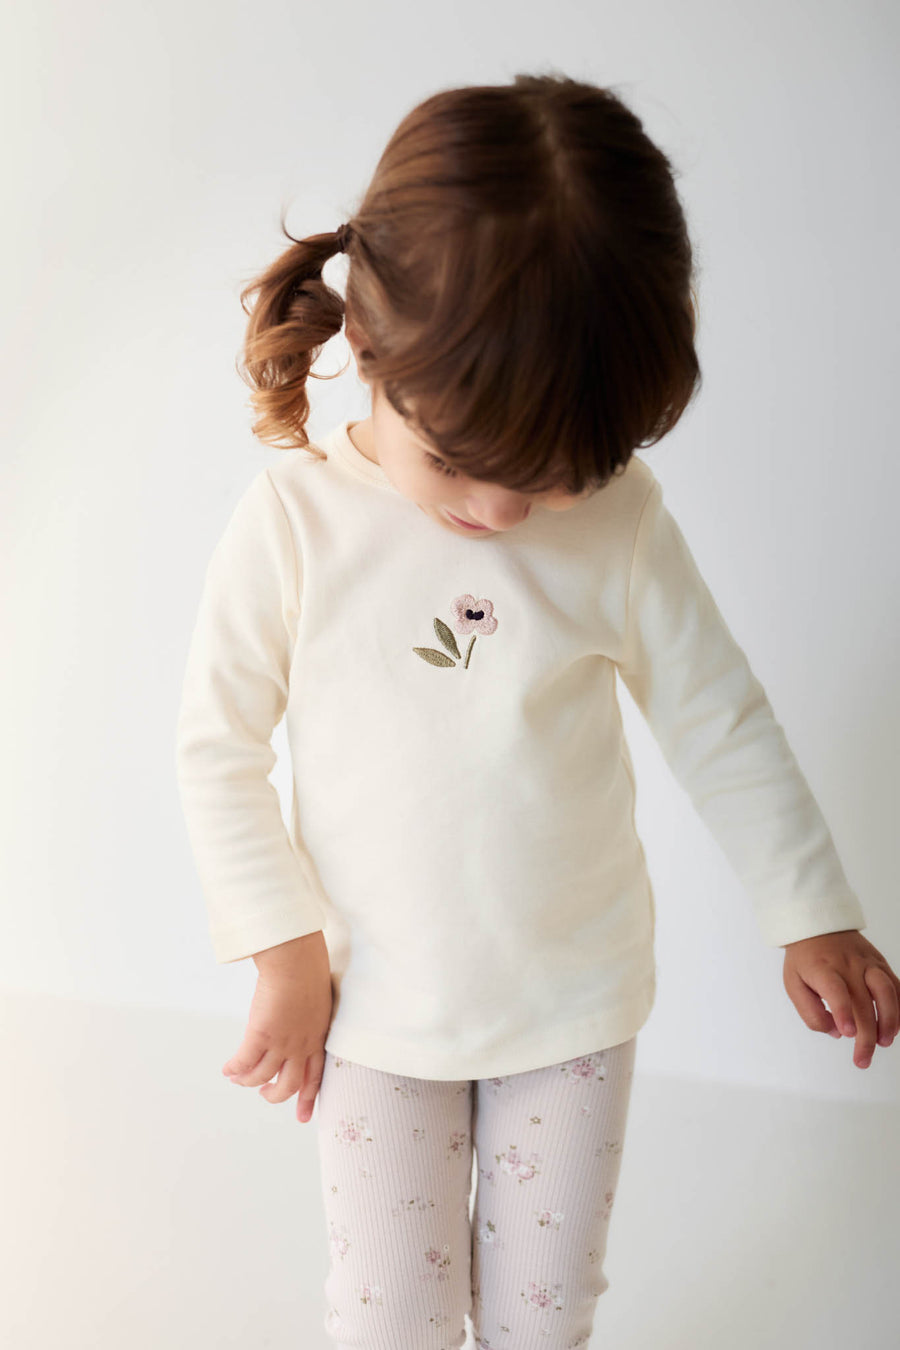 Pima Cotton Long Sleeve Top - Parchment Petite Goldie Childrens Top from Jamie Kay NZ